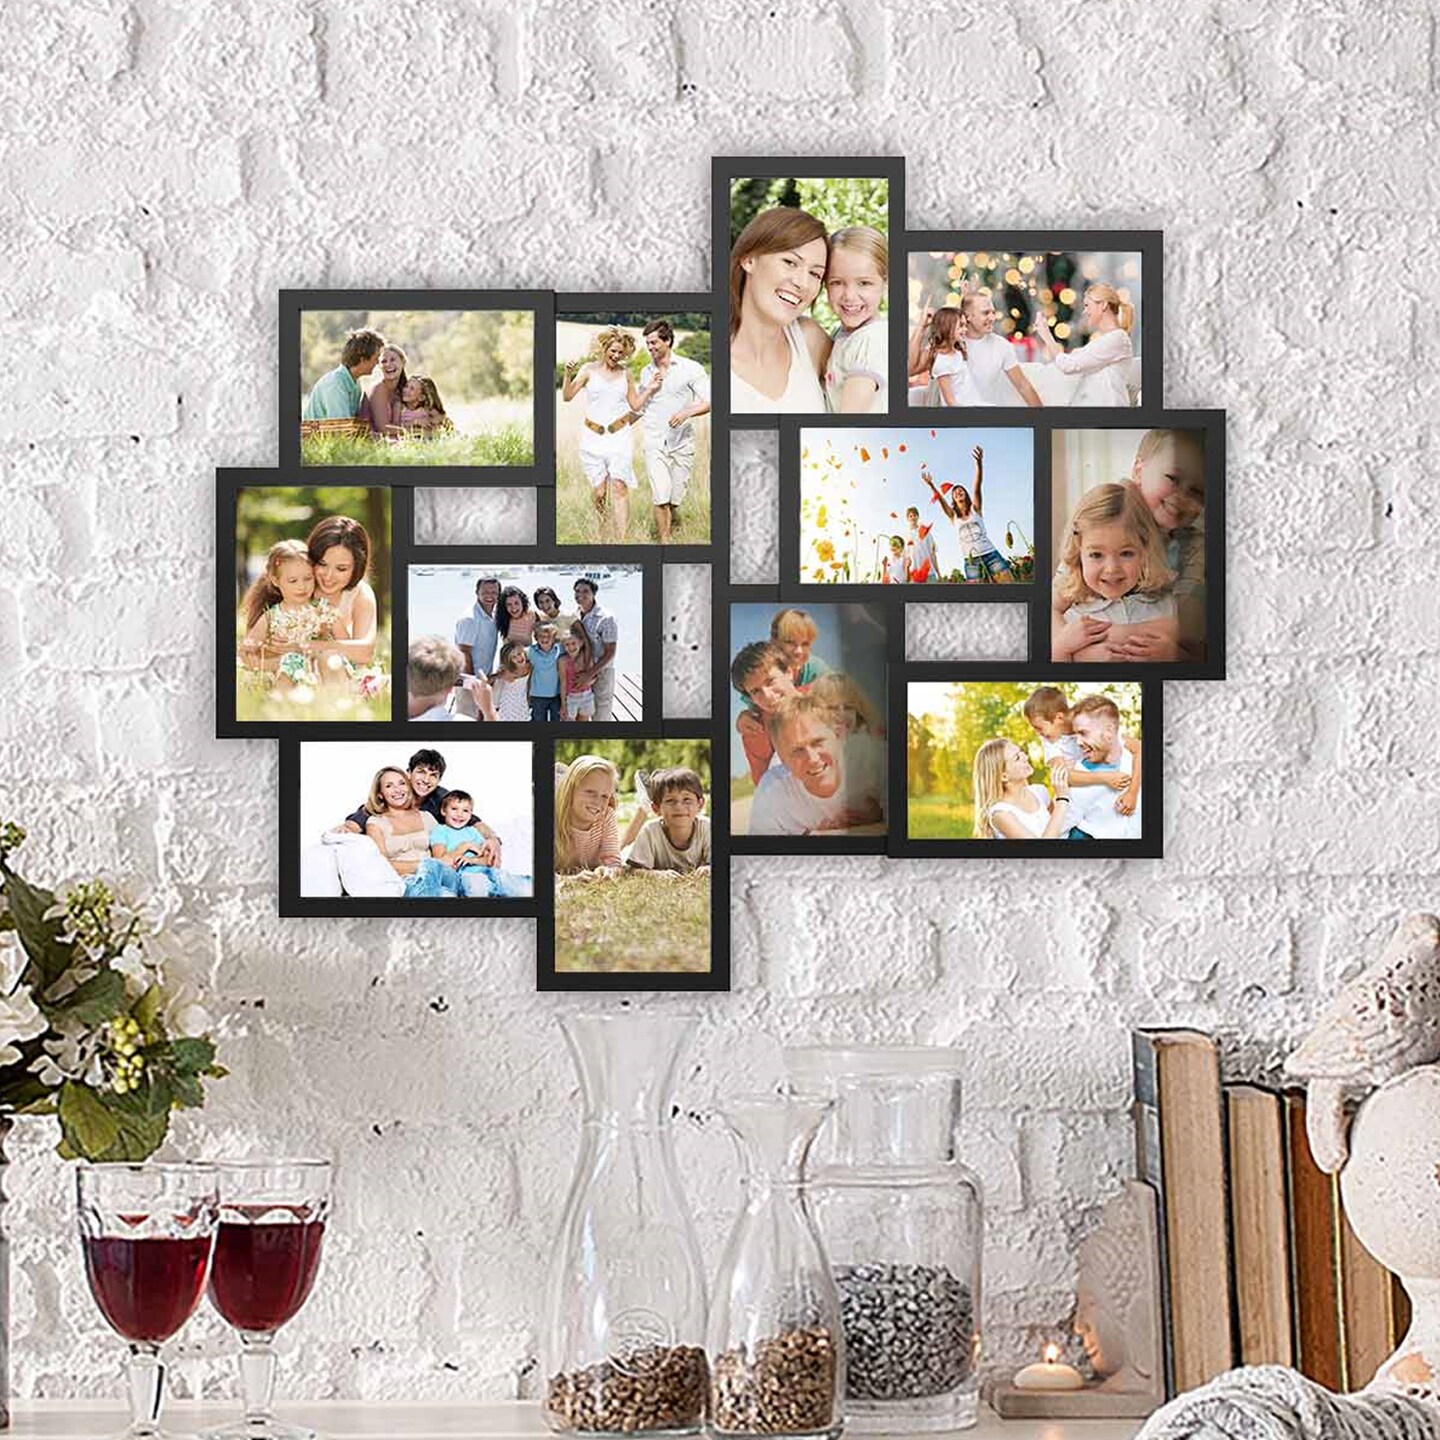 Lavish Home Picture Frame Set, 4x6 Frames Pack For Picture Gallery Wall  With Stand and Hanging Hooks, Set of 6 (Black)